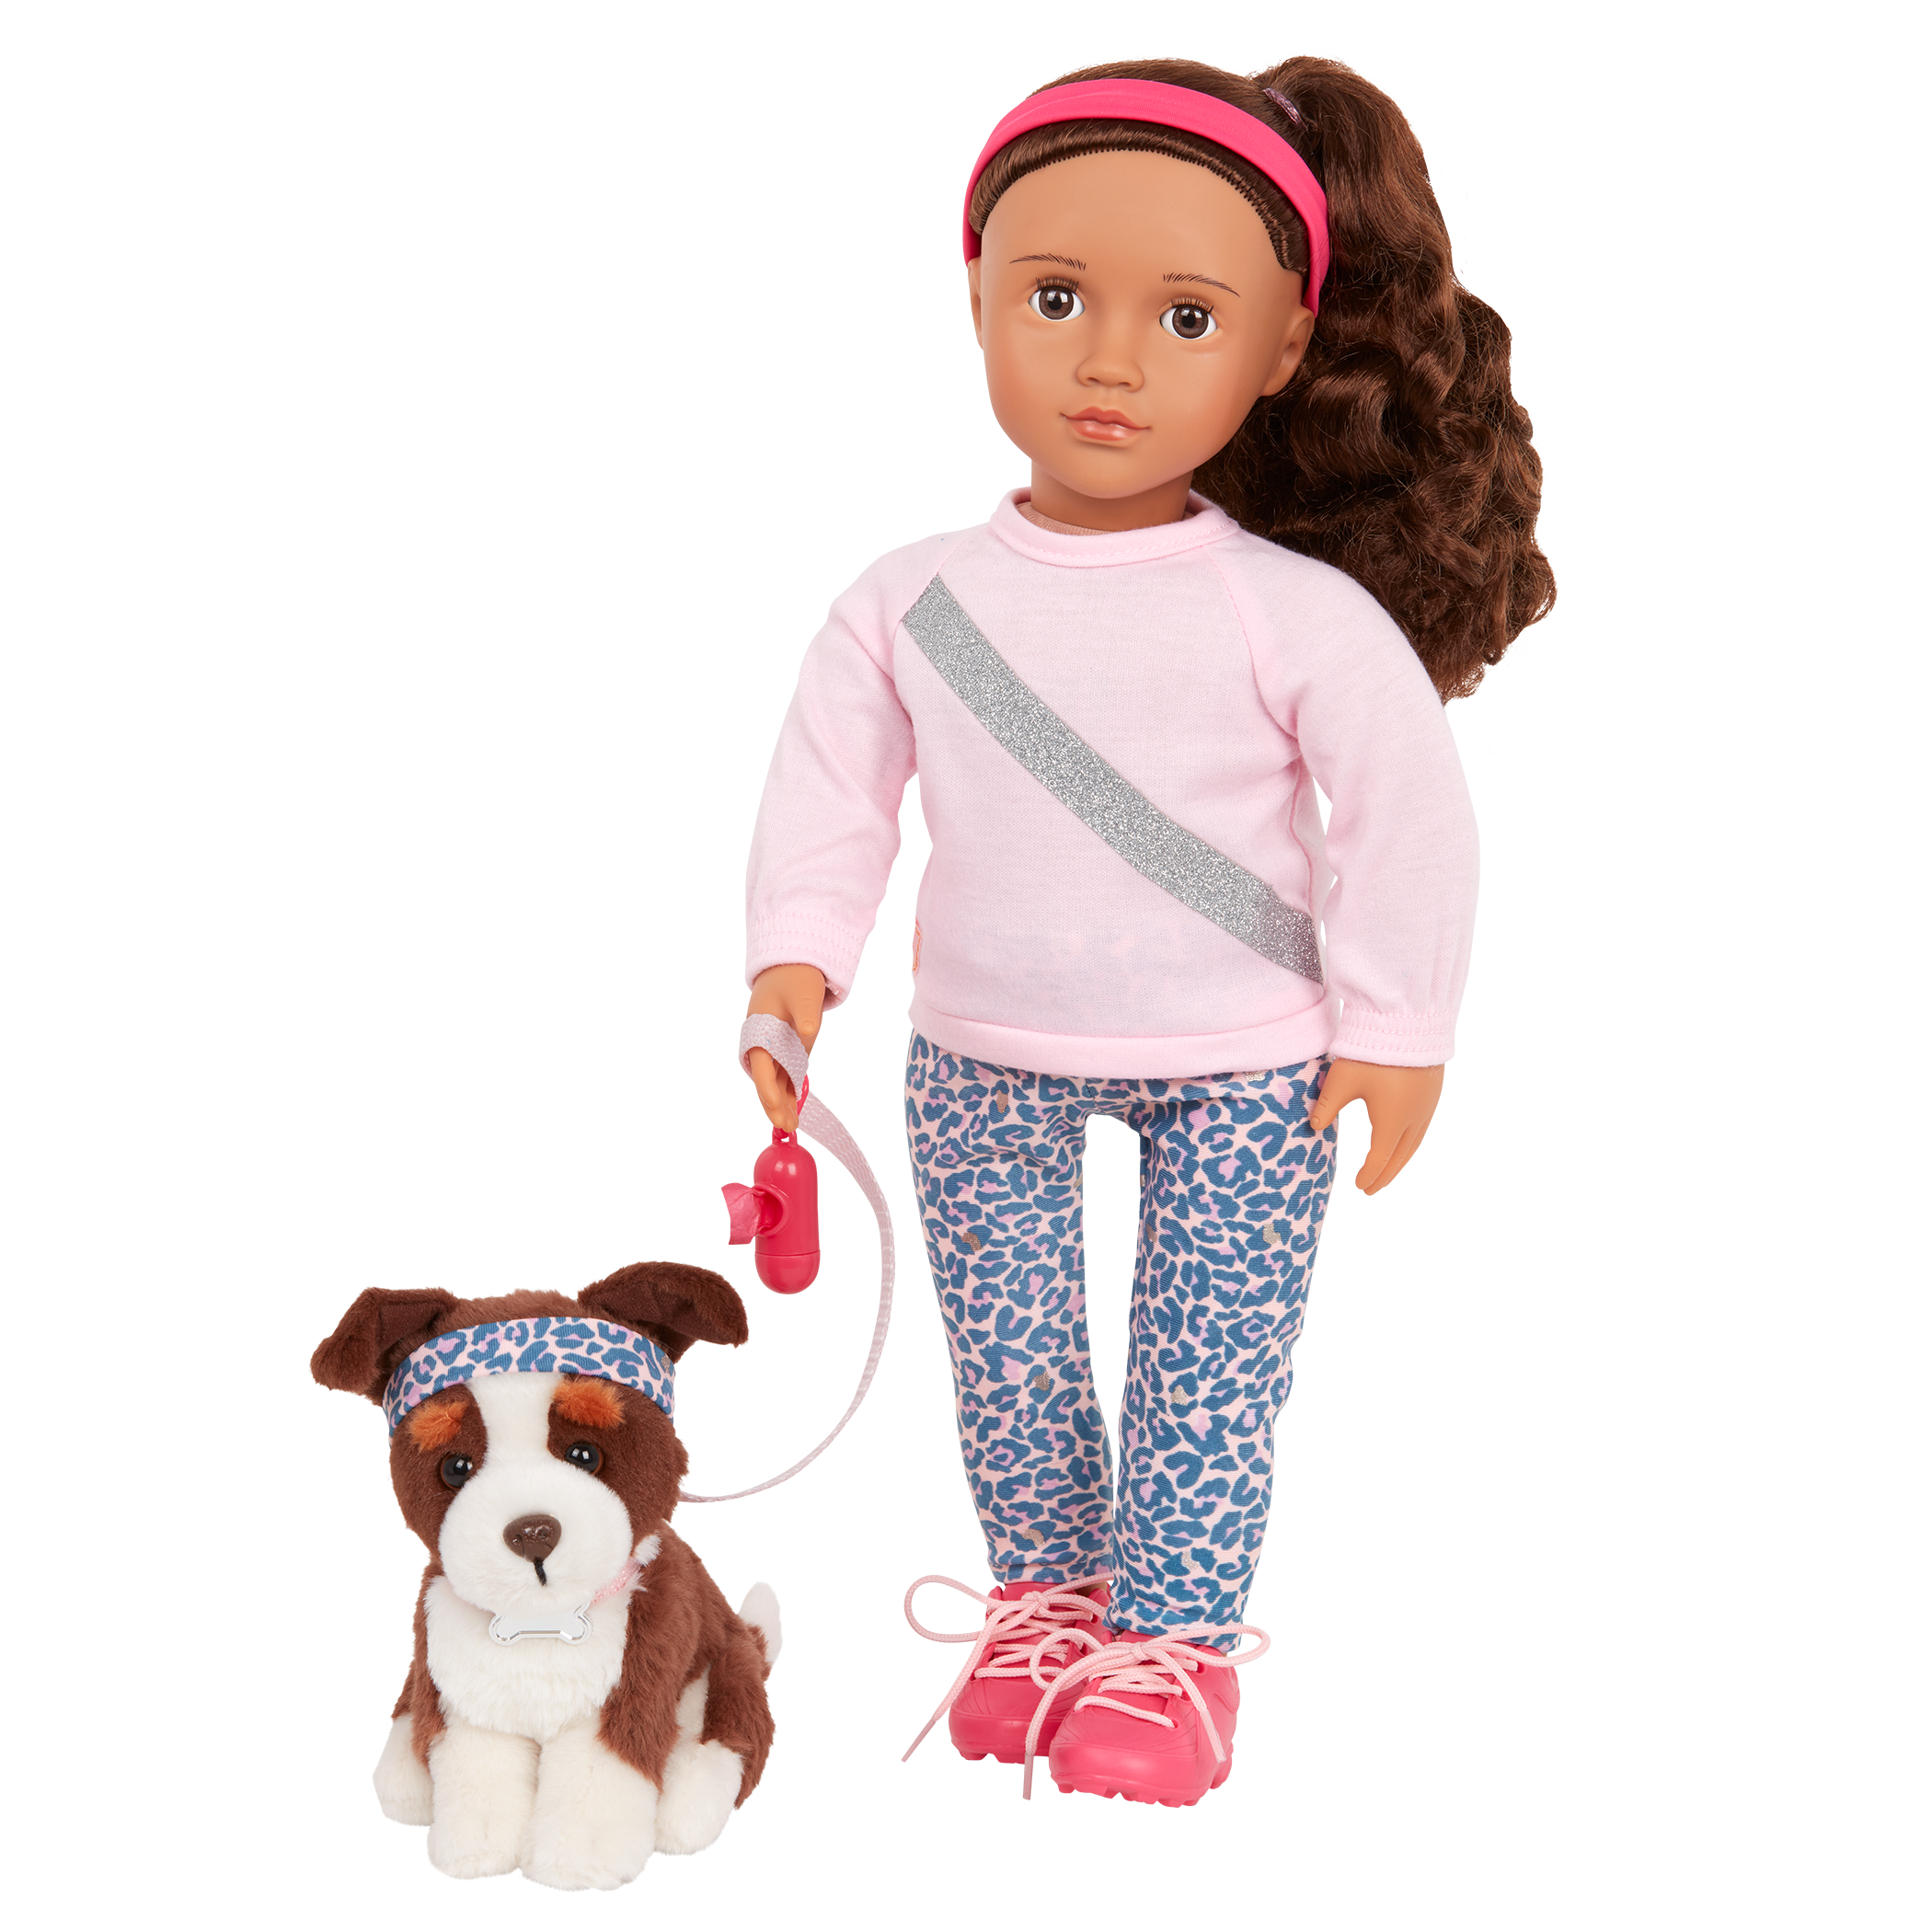 Our Generation 18-inch Dog Trainer Doll Natalia & Pet Plush Nillie